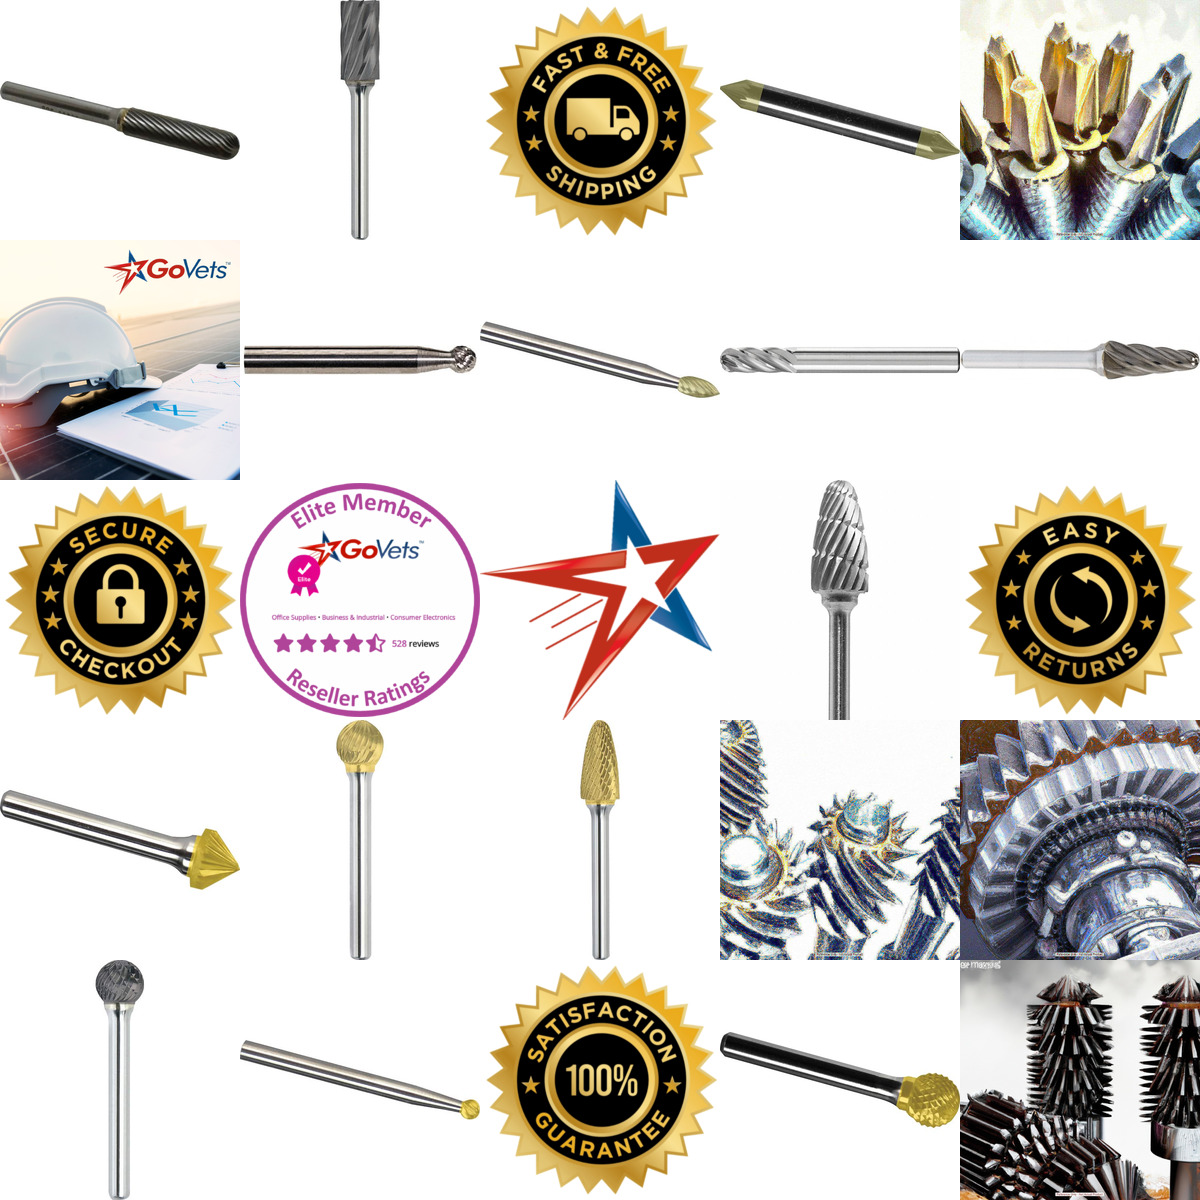 A selection of Burrs products on GoVets